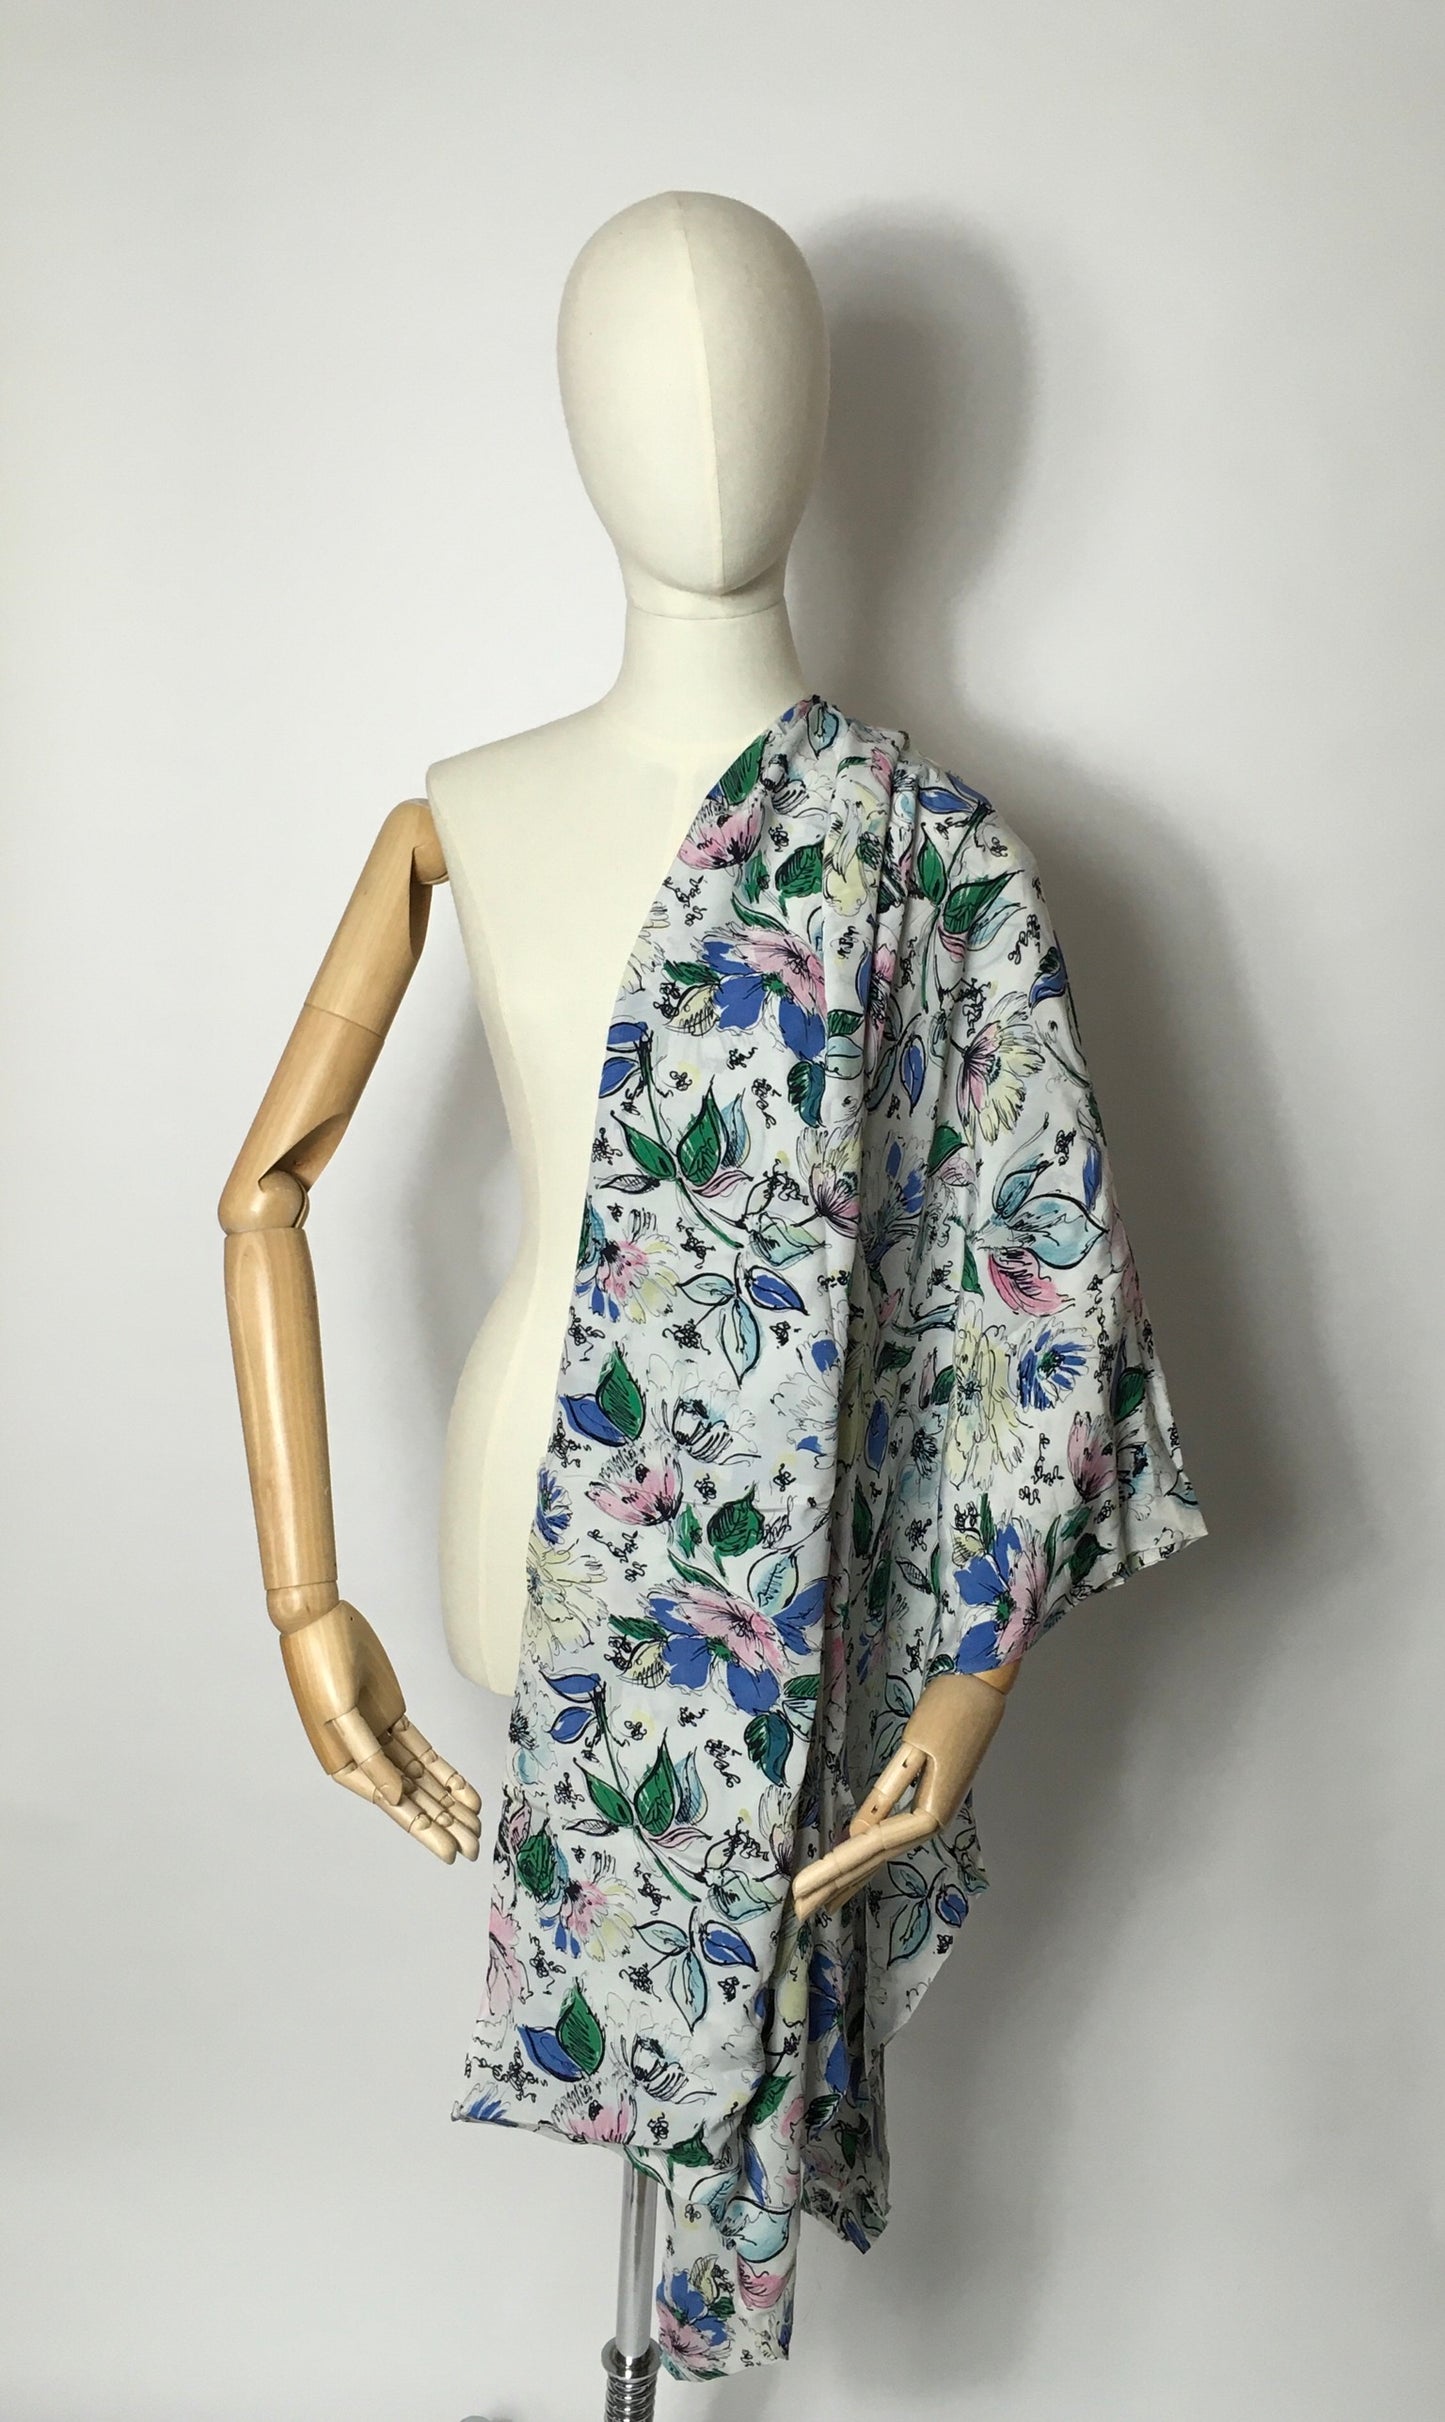 Original 1940’s Semi Sheer Floral Rayon - In a Beautiful Summer Colour Pallet - 3.5m